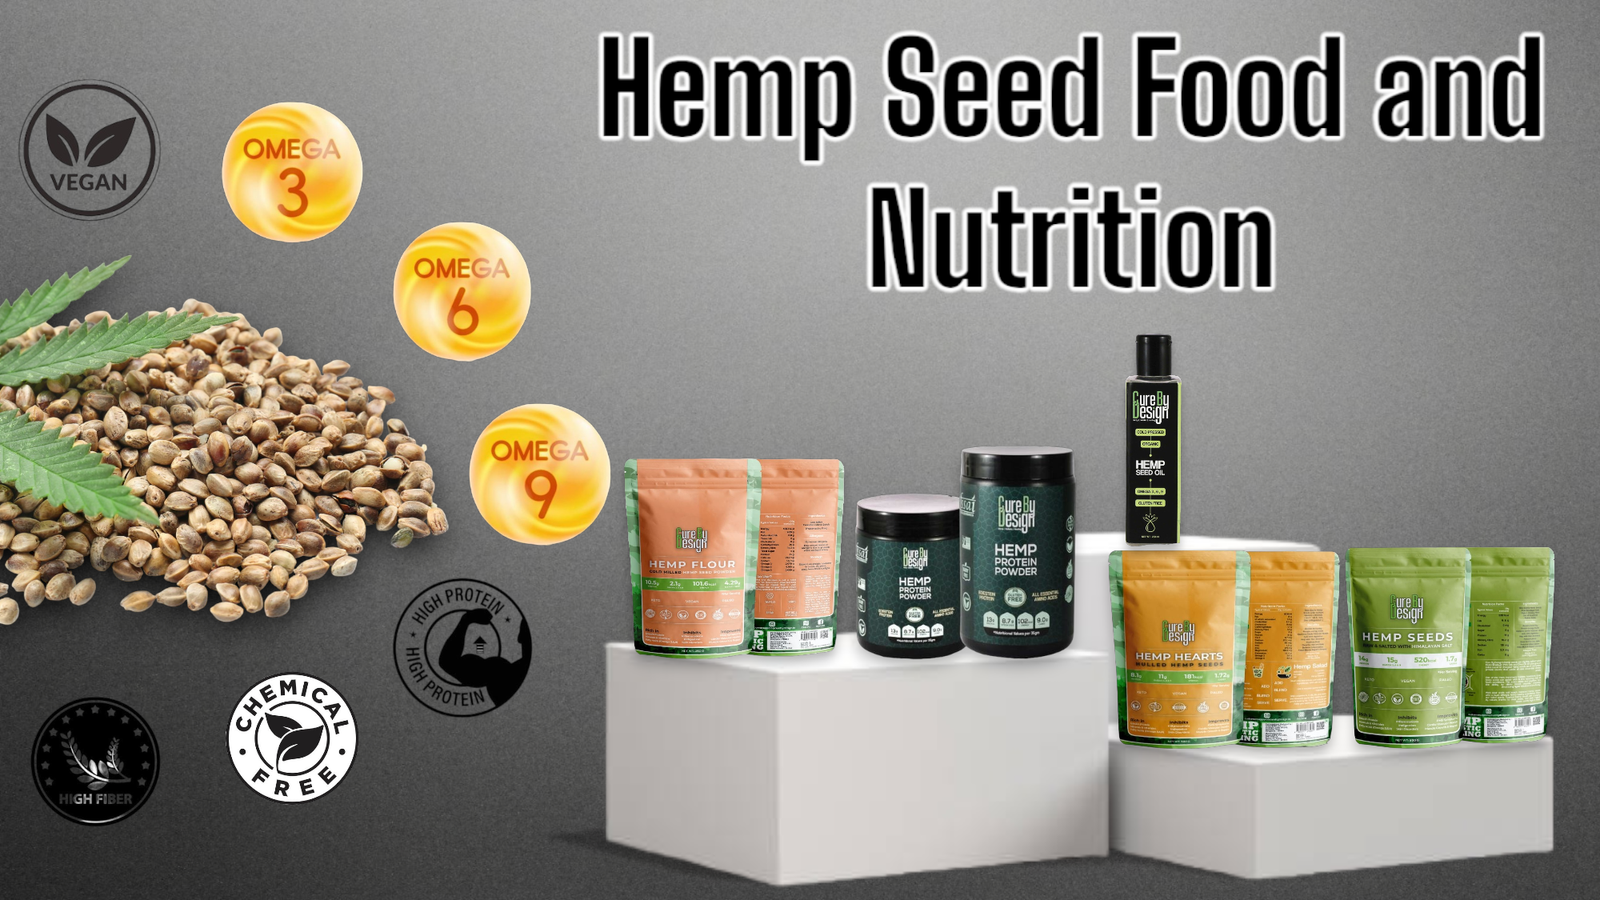 Cure By Design Hemp Seed Food and Nutrition